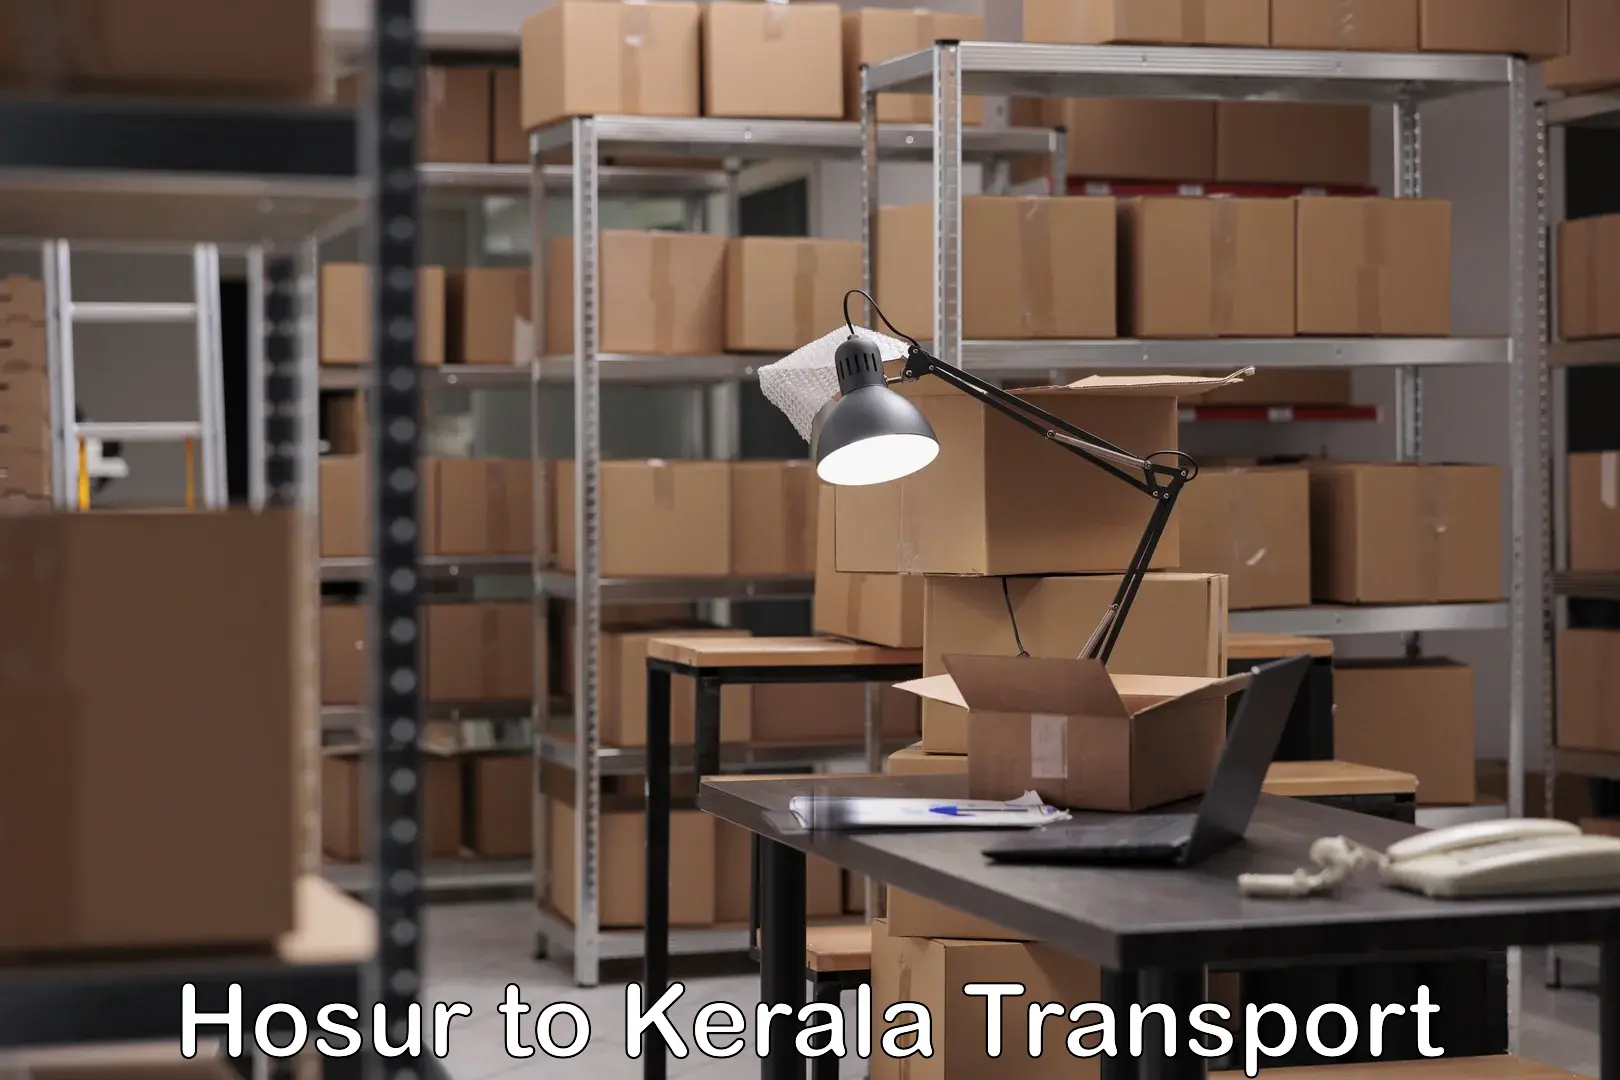 Goods delivery service Hosur to Kerala